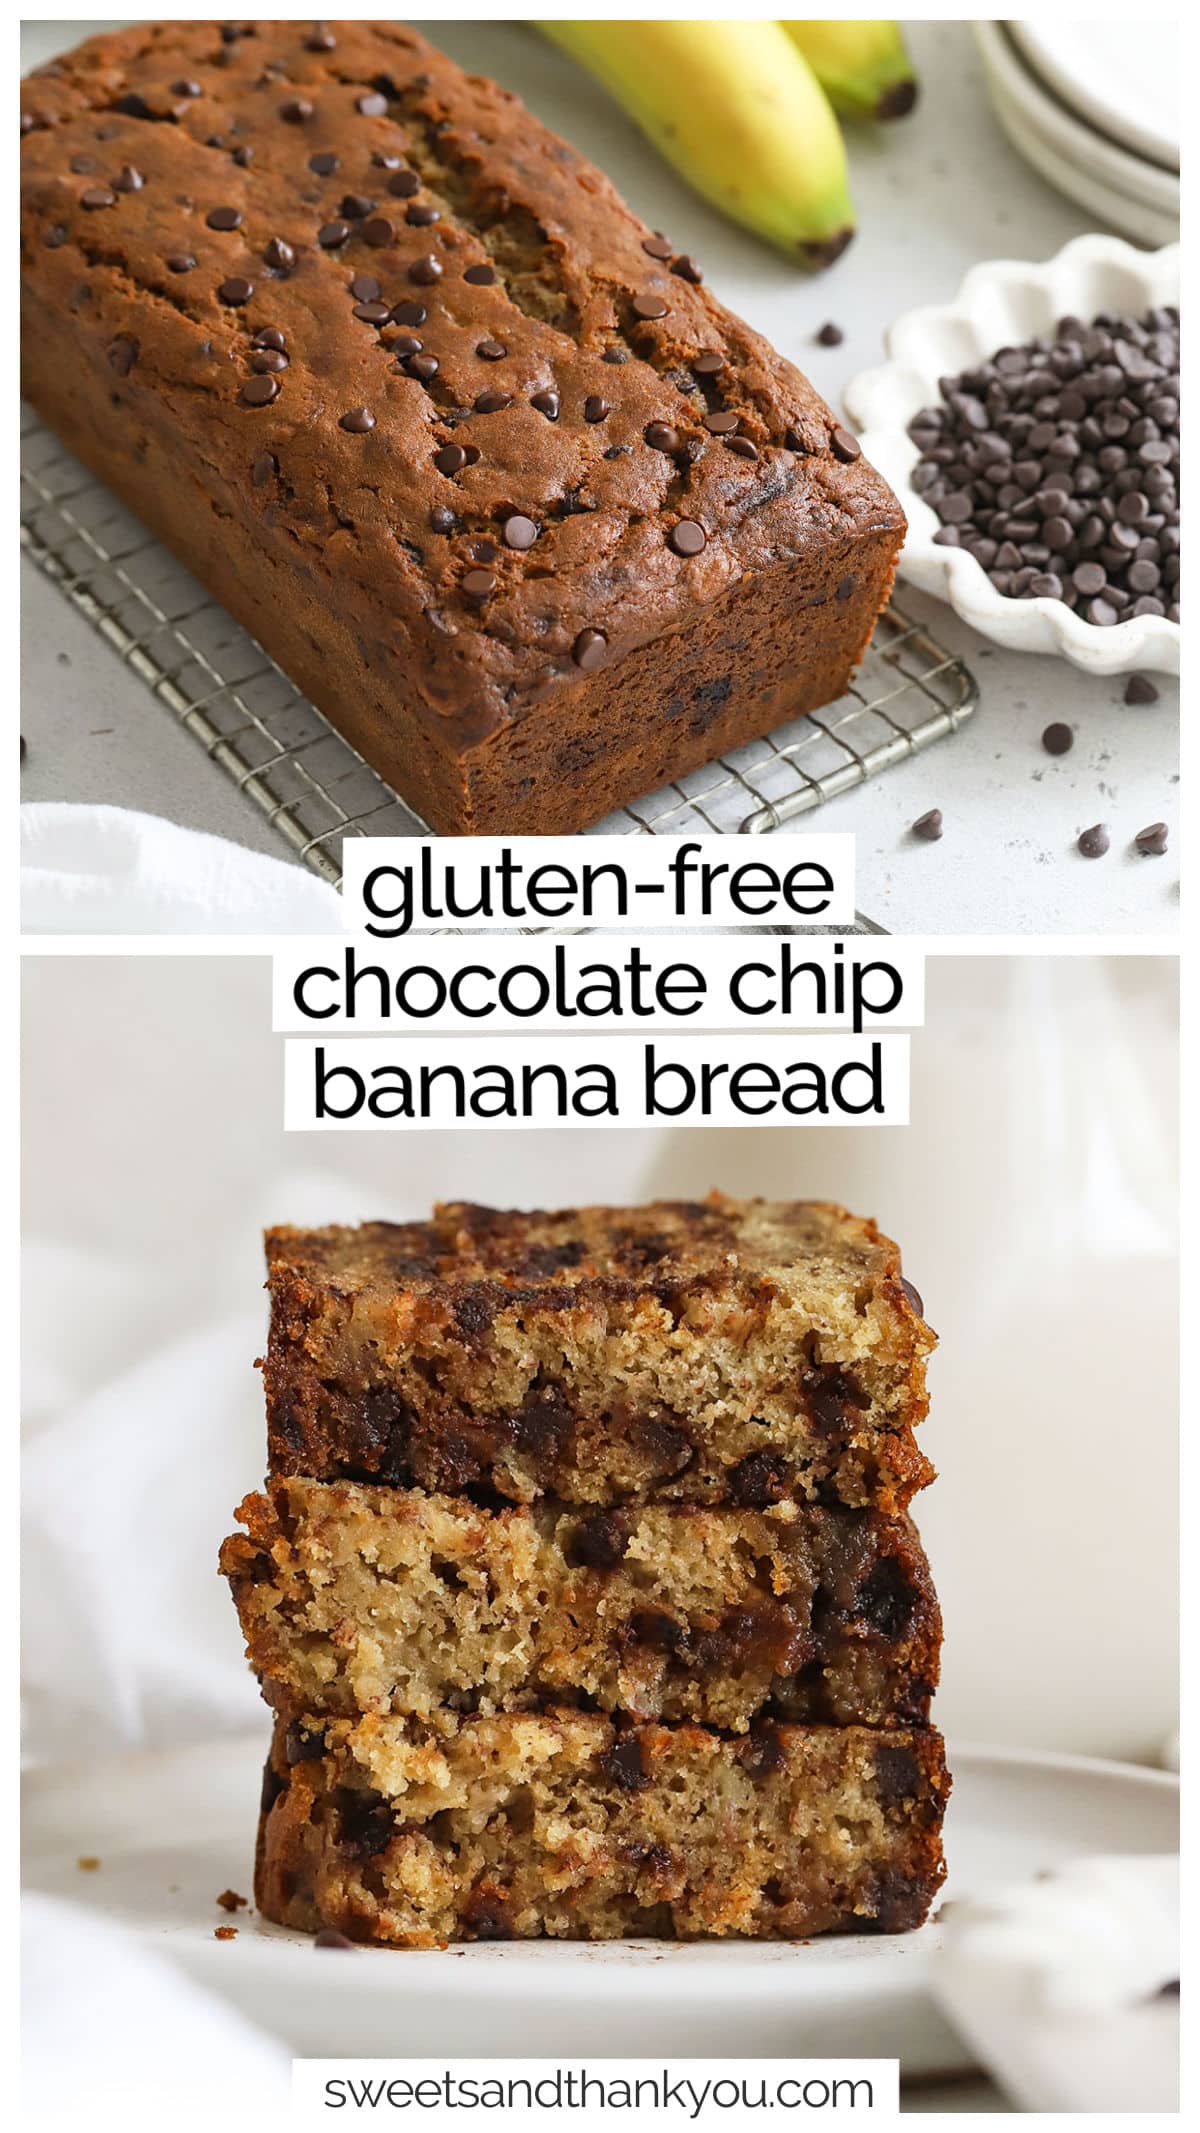 This one-bowl gluten-free chocolate chip banana bread recipe is ultra moist thanks to a few simple ingredients. It's got all the delicious flavor of classic gluten-free chocolate chip banana bread, simply made gluten-free! It's the perfect recipe to use up ripe bananas on your counter! We think the chocolate-banana flavor and soft texture make it the best gluten-free banana bread recipe around! 